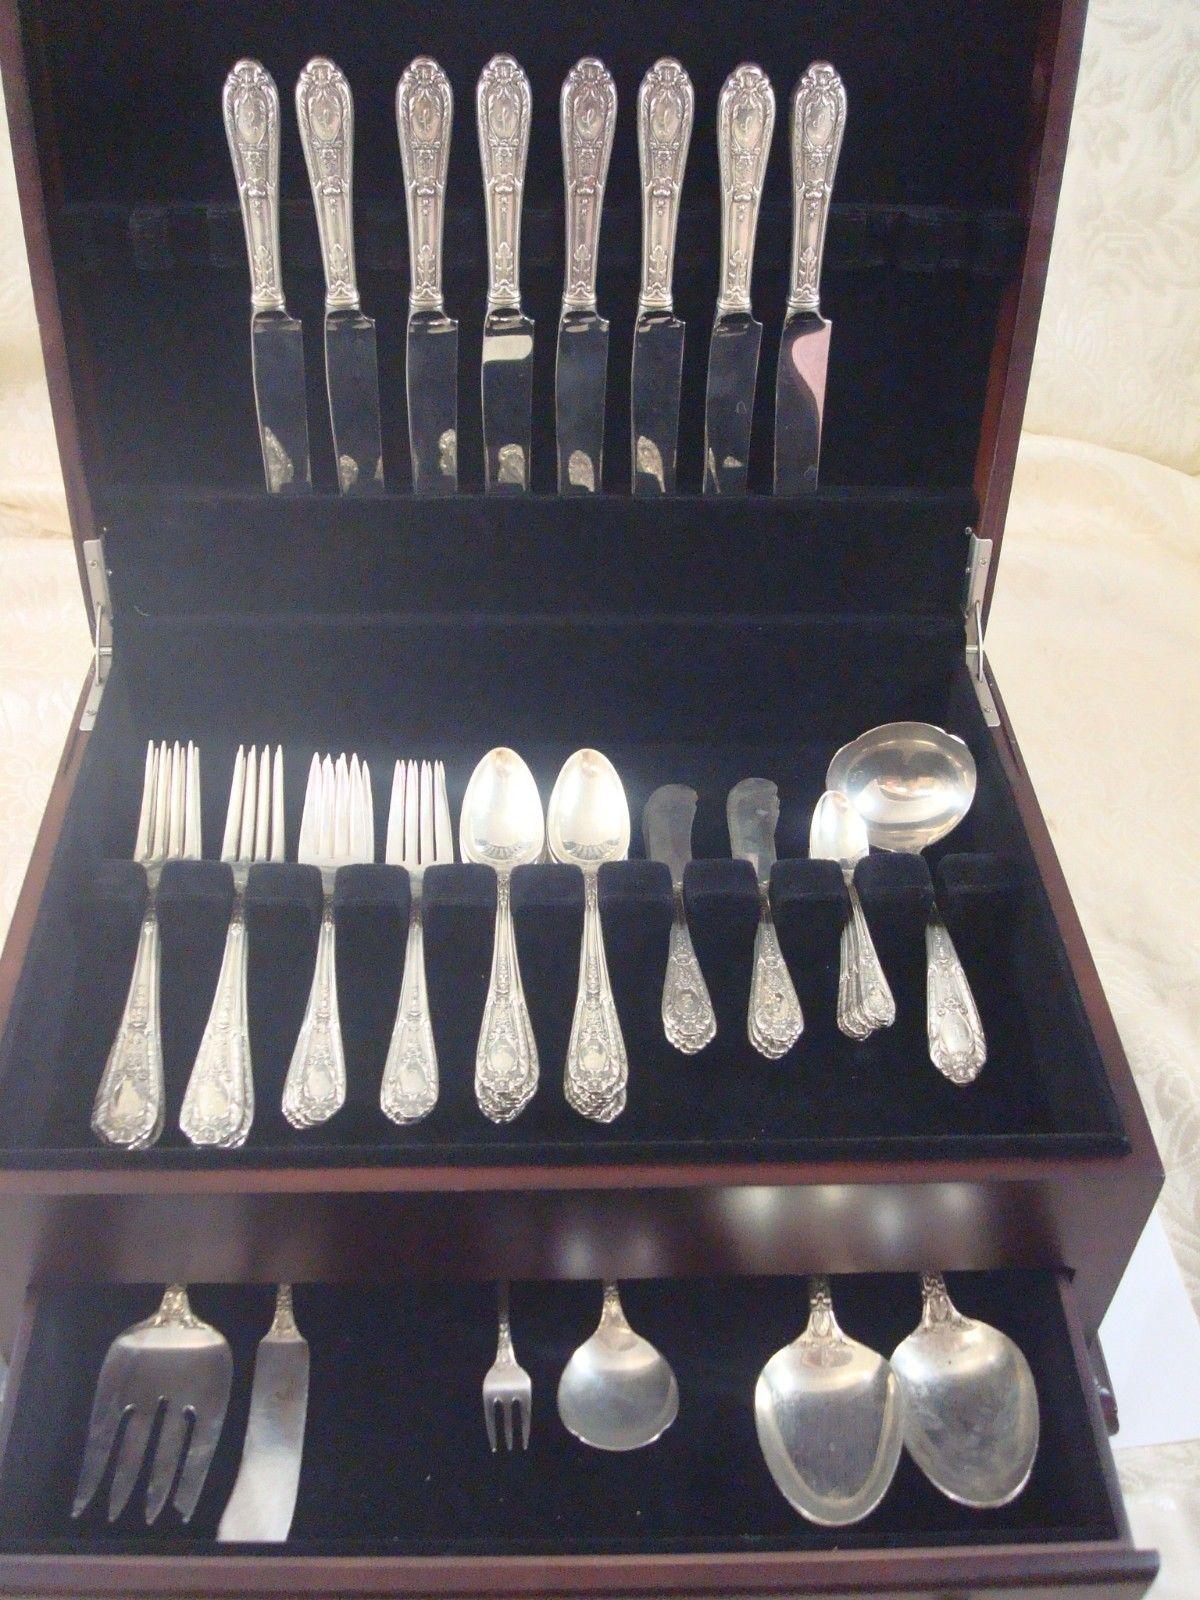 Beautiful Fontaine by International sterling silver flatware set - 65 pieces. This set includes:

Eight knives, 9